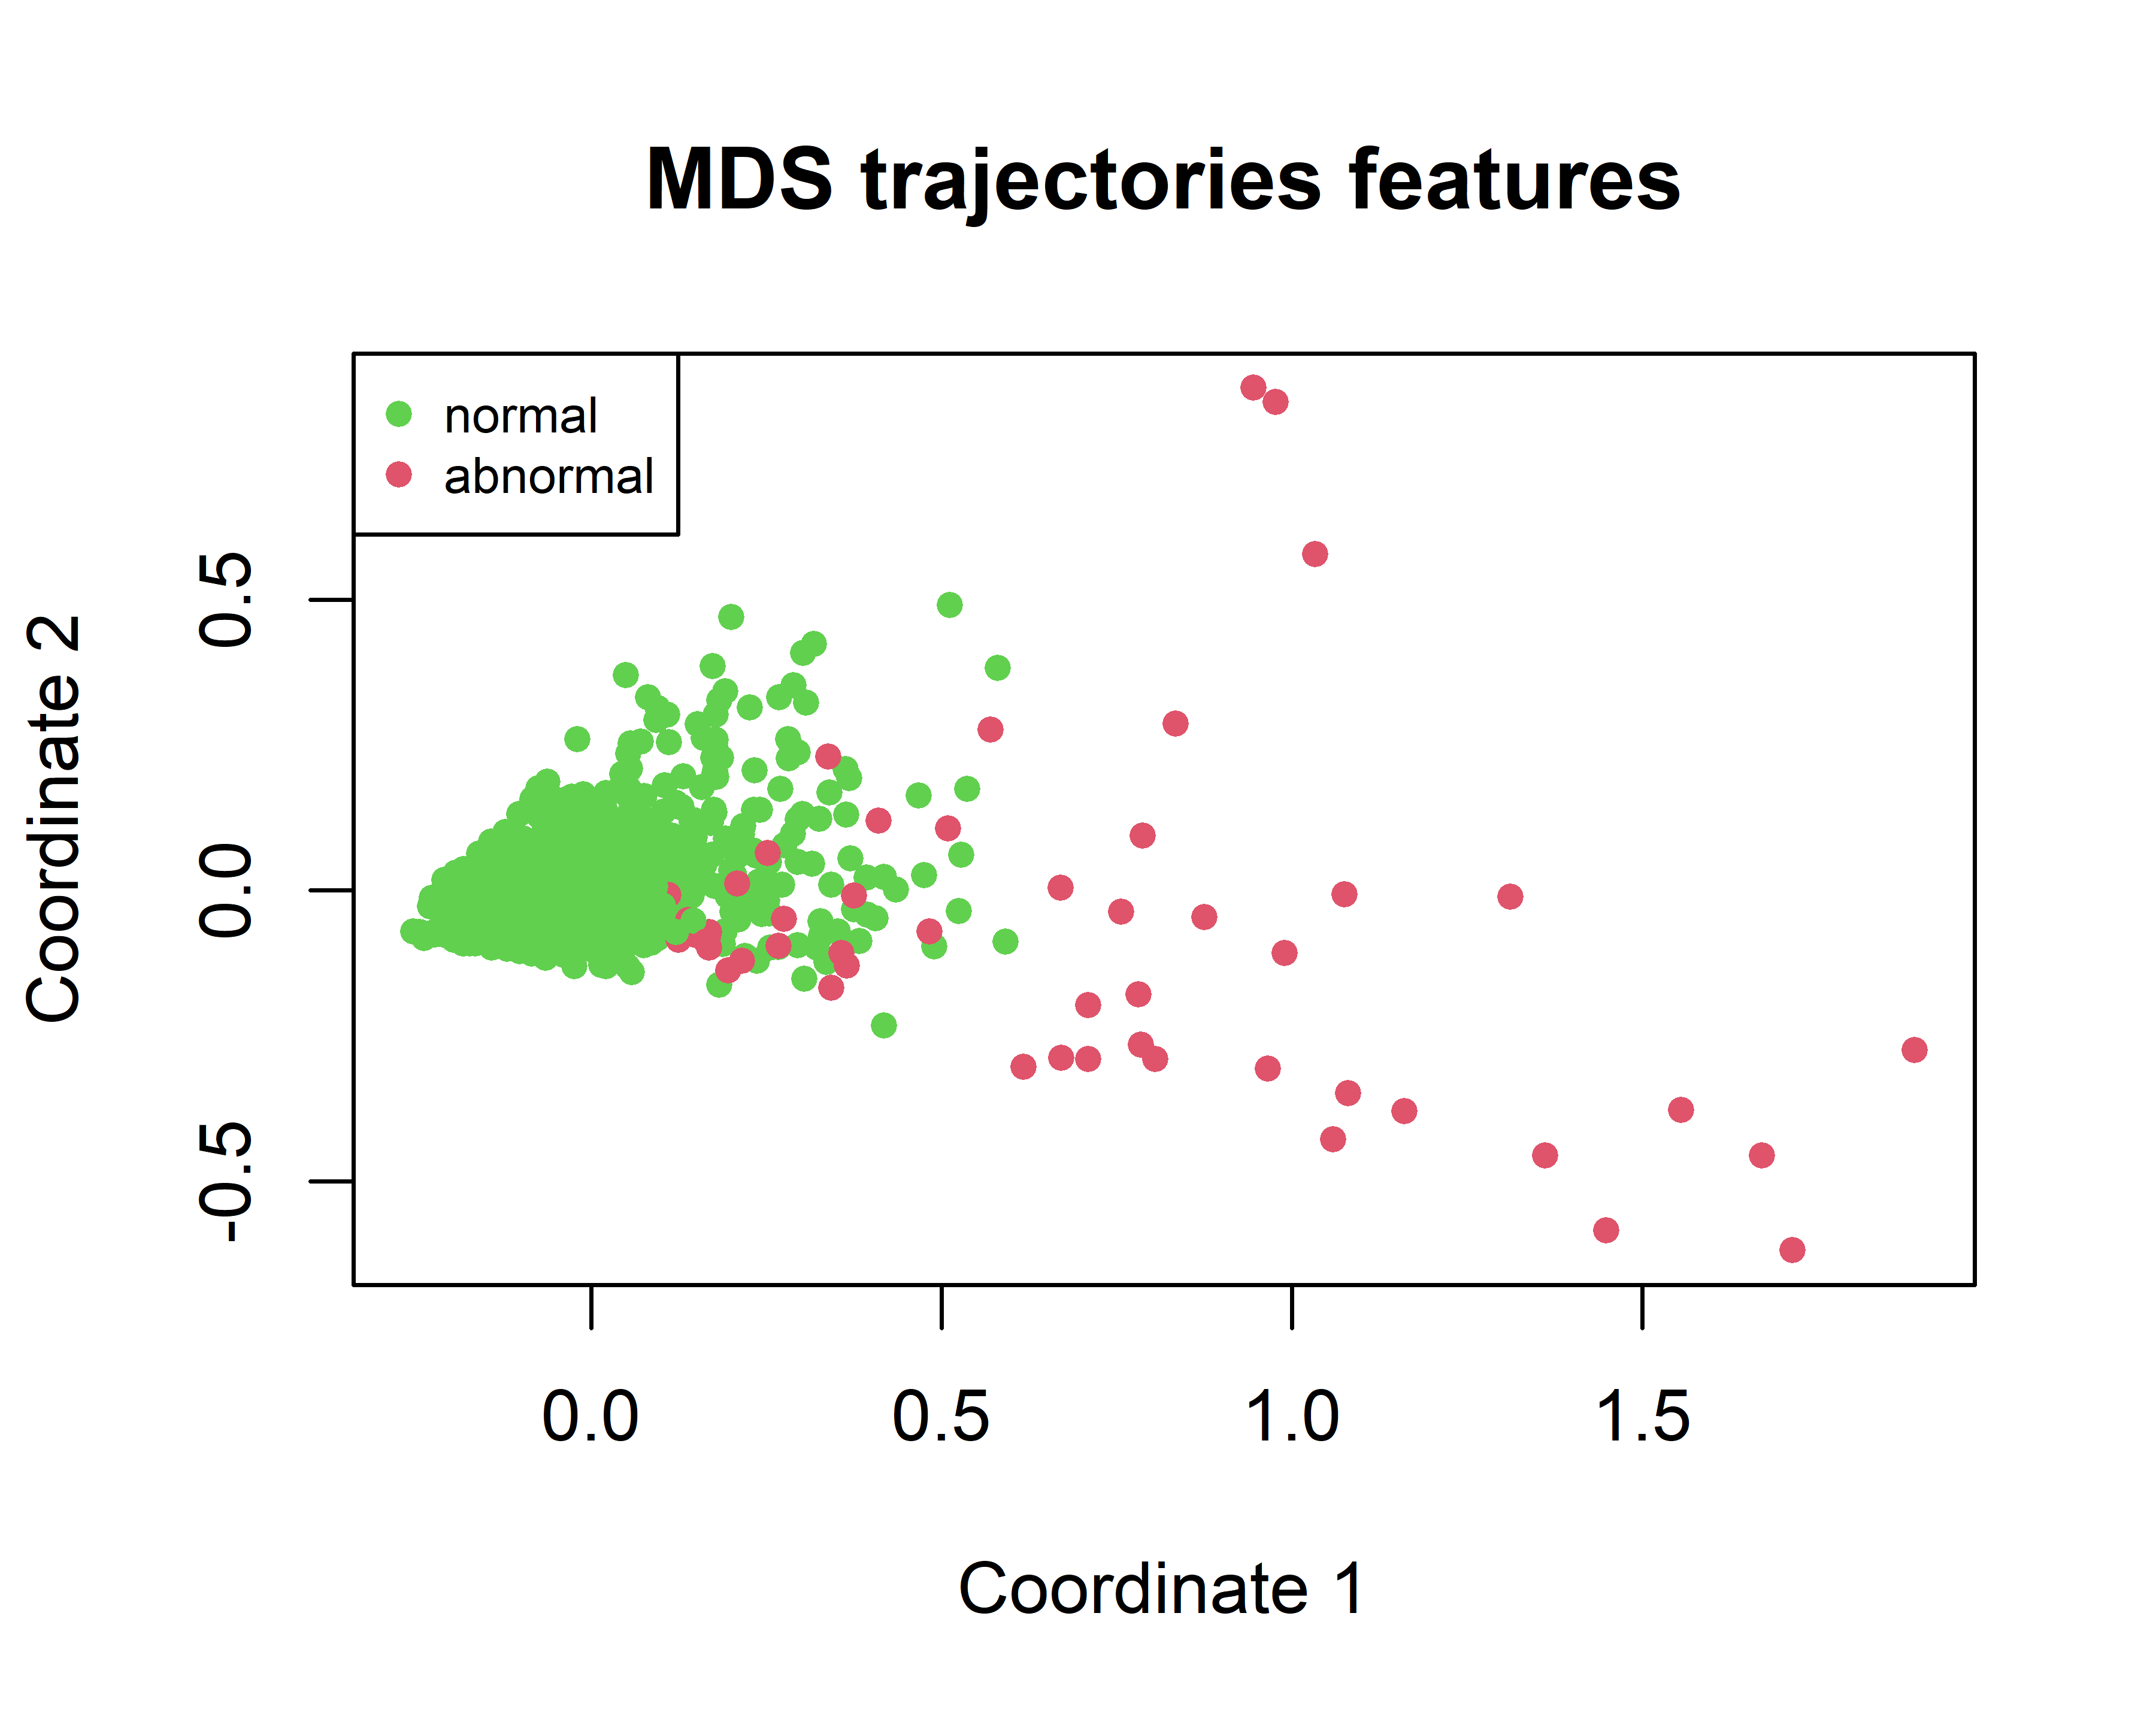 MDS of the fish trajectories.